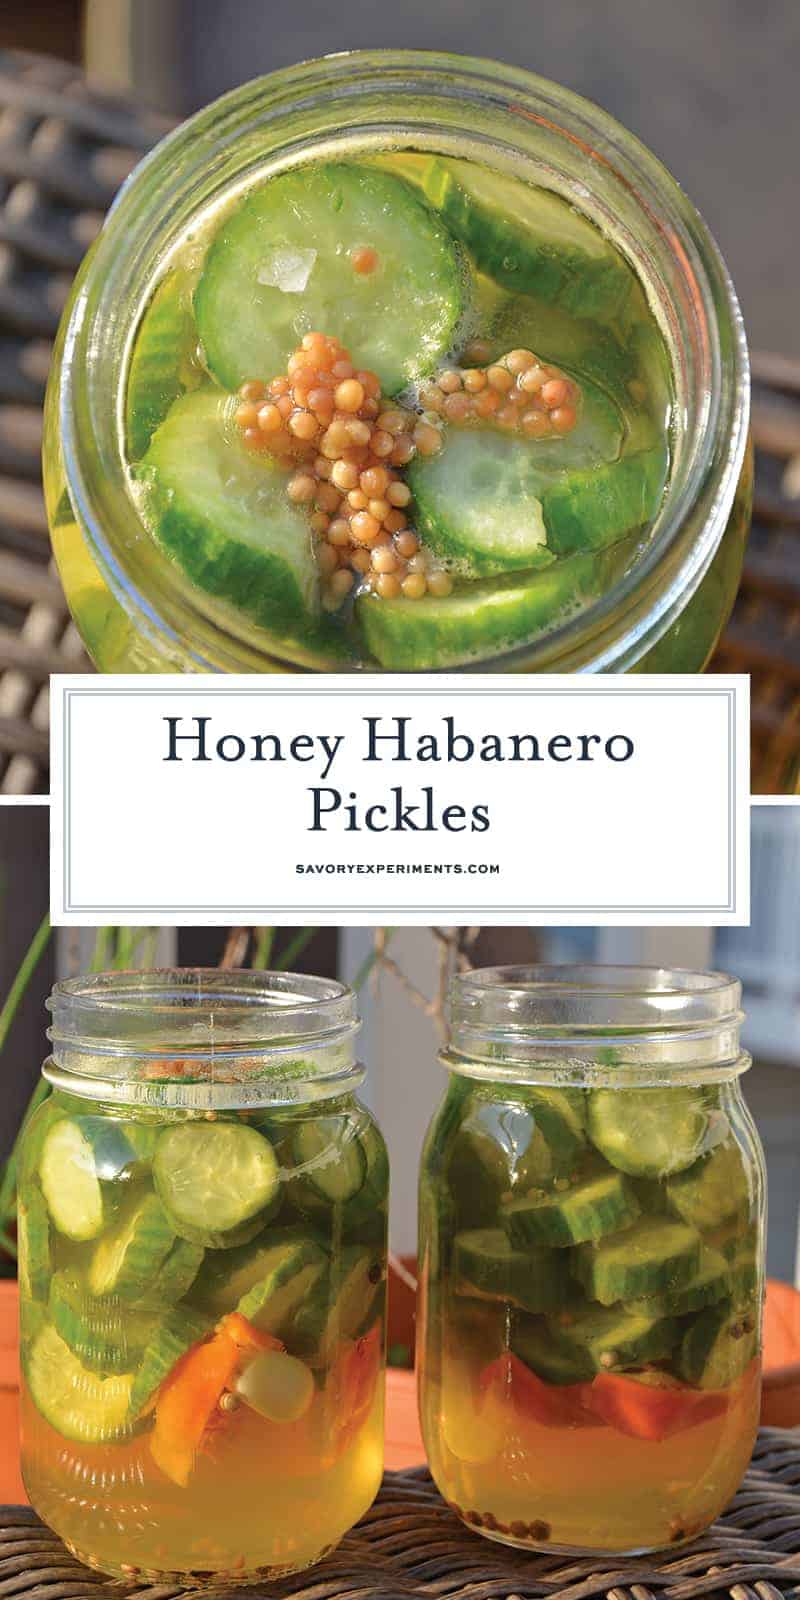 Honey Habanero Pickles are the best of both worlds, spicy and sweet. Eat them as a snack or pair them your favorite burger or hot dog. #homemadepickles #sweetandspicypickles #picklerecipe www.savoryexperiments.com